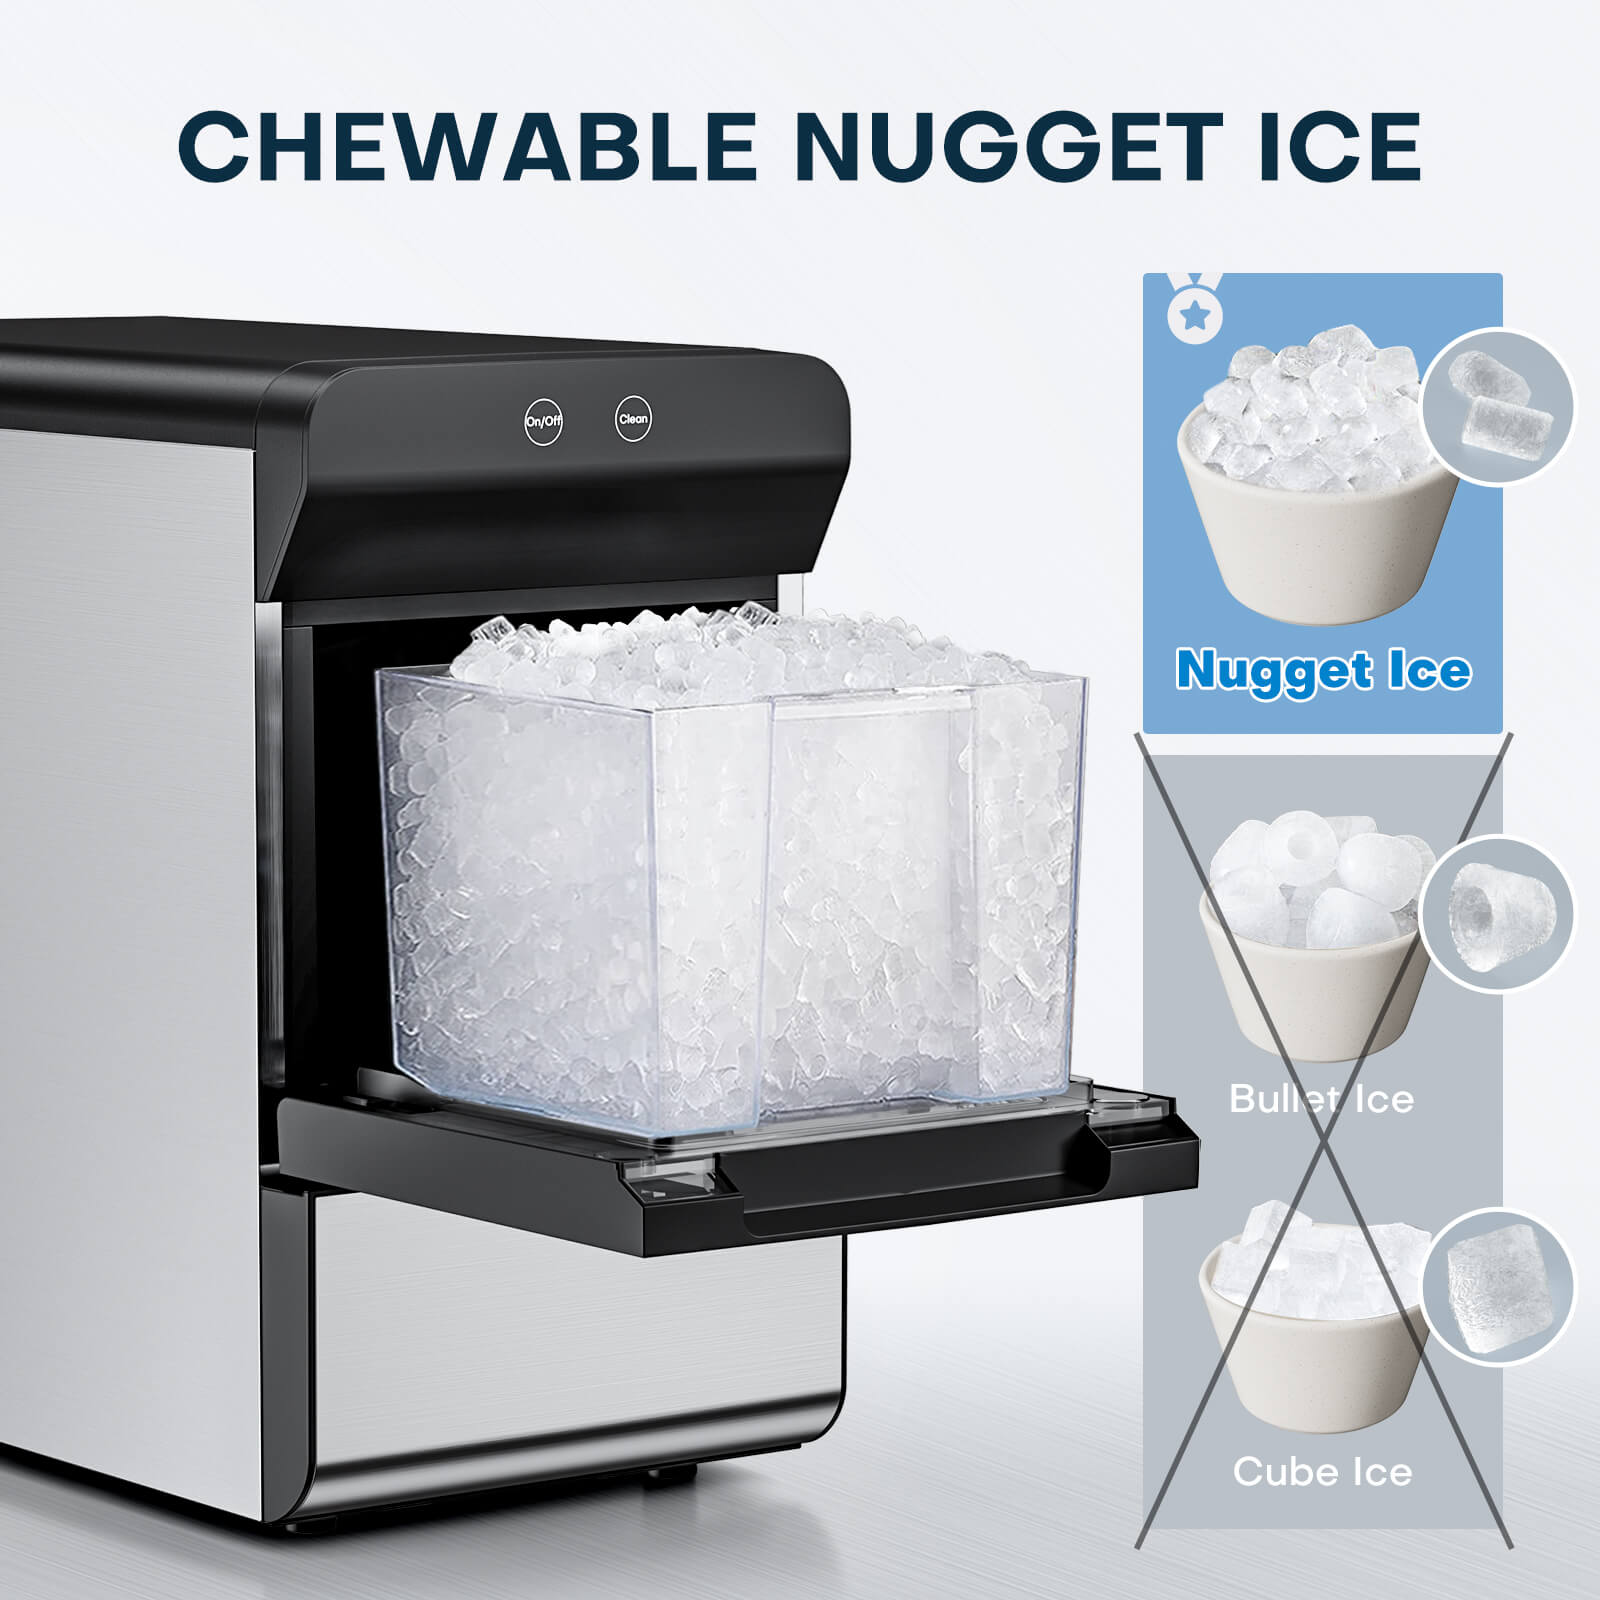 X90 Pro Nugget Ice Maker Countertop, Perfect for family use – Upstreman